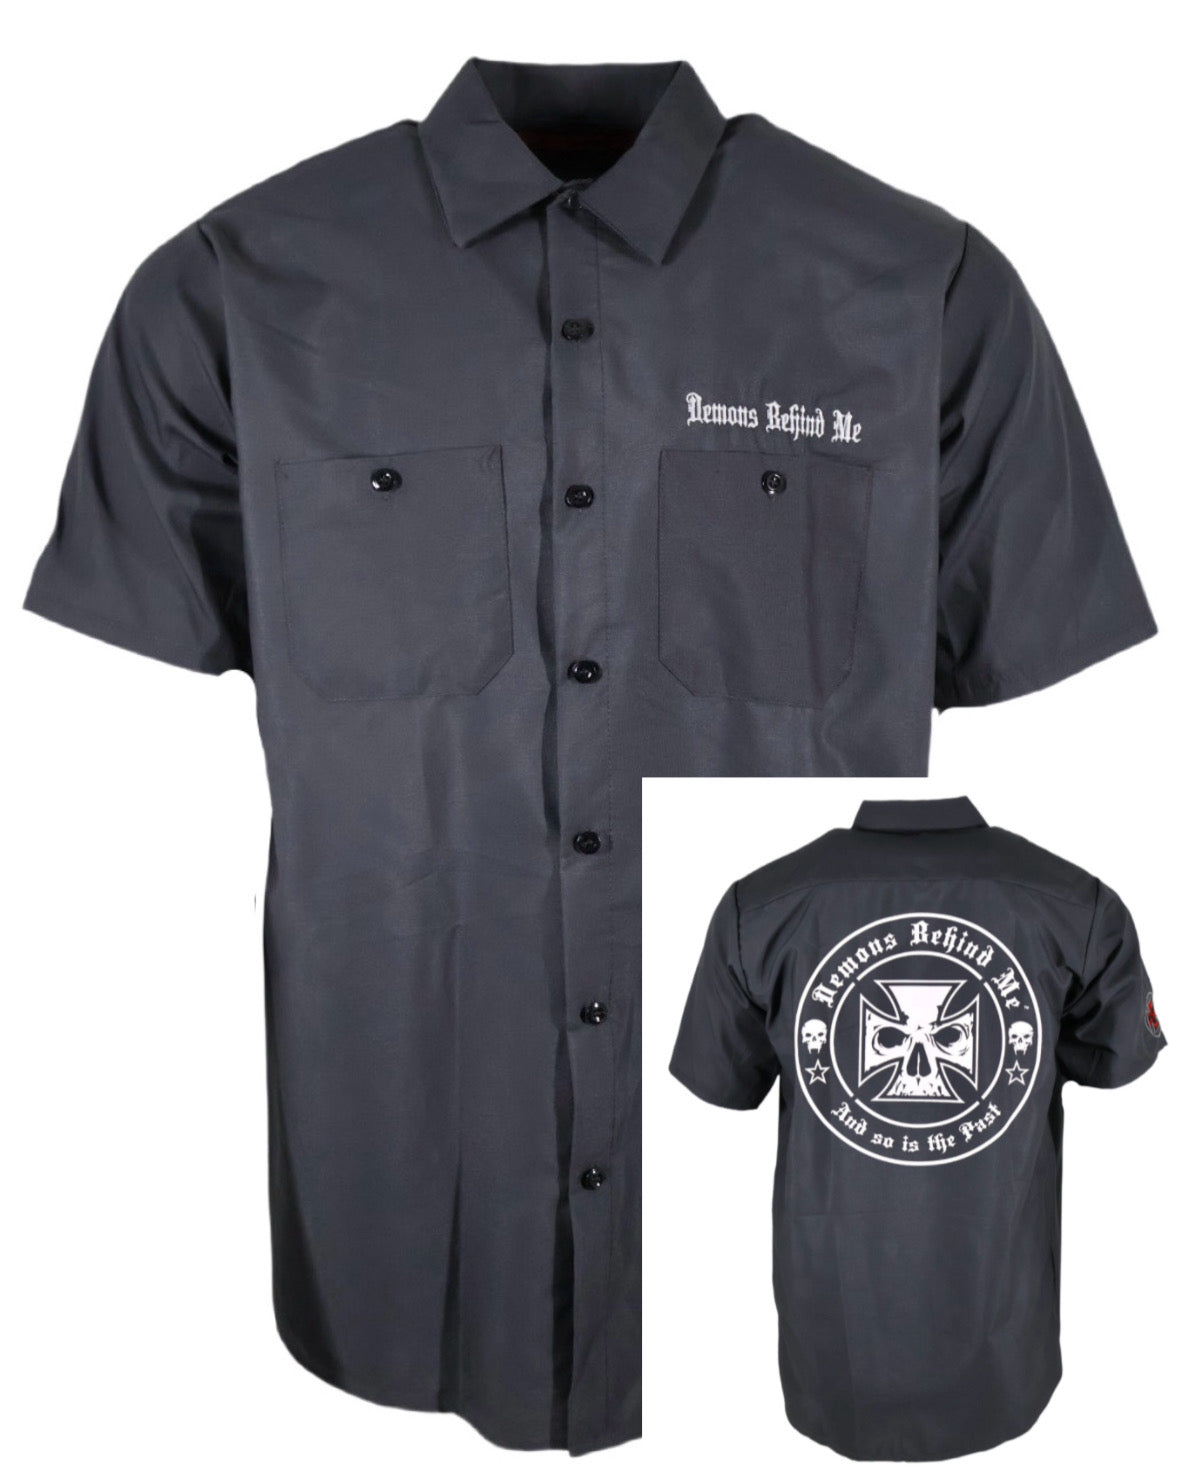 Embroidered Shop Shirt -Men's Charcoal